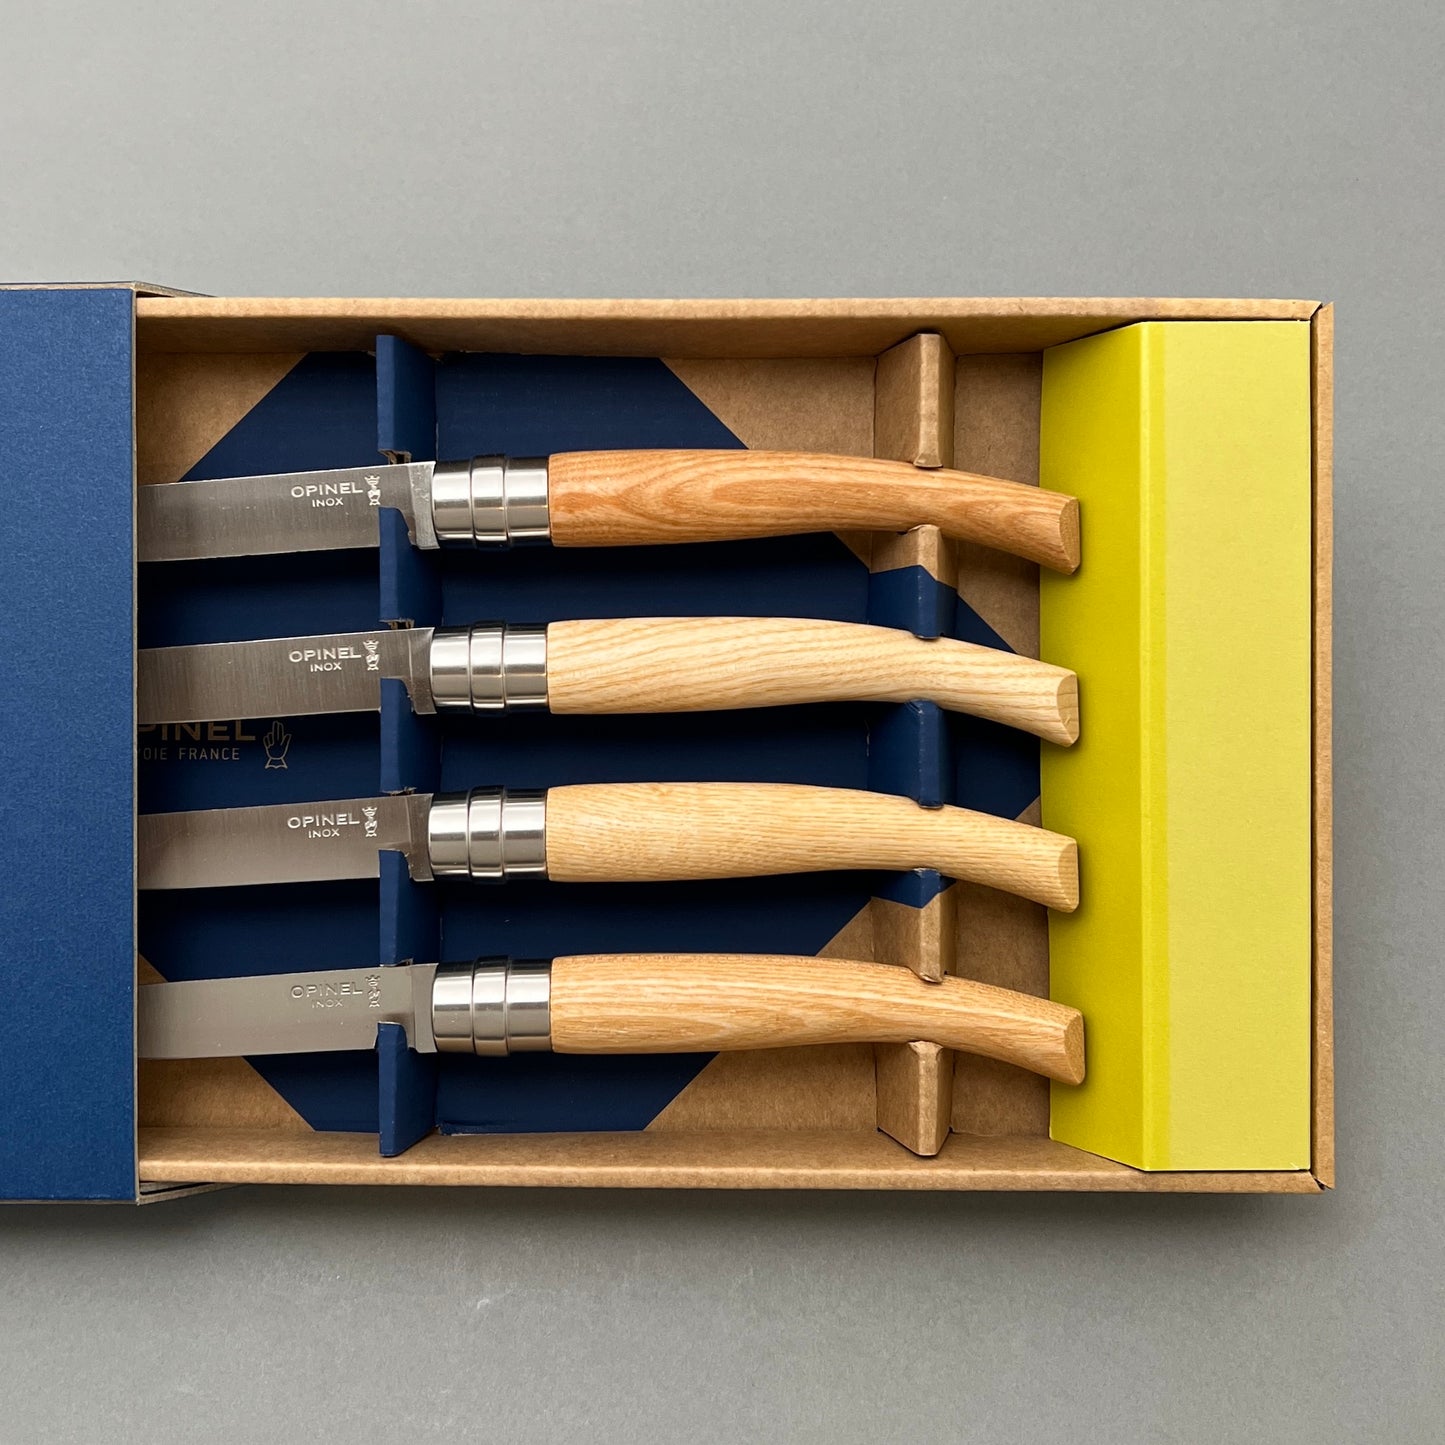 Four table knifes laying next to each other in a cardboard box on a grey background